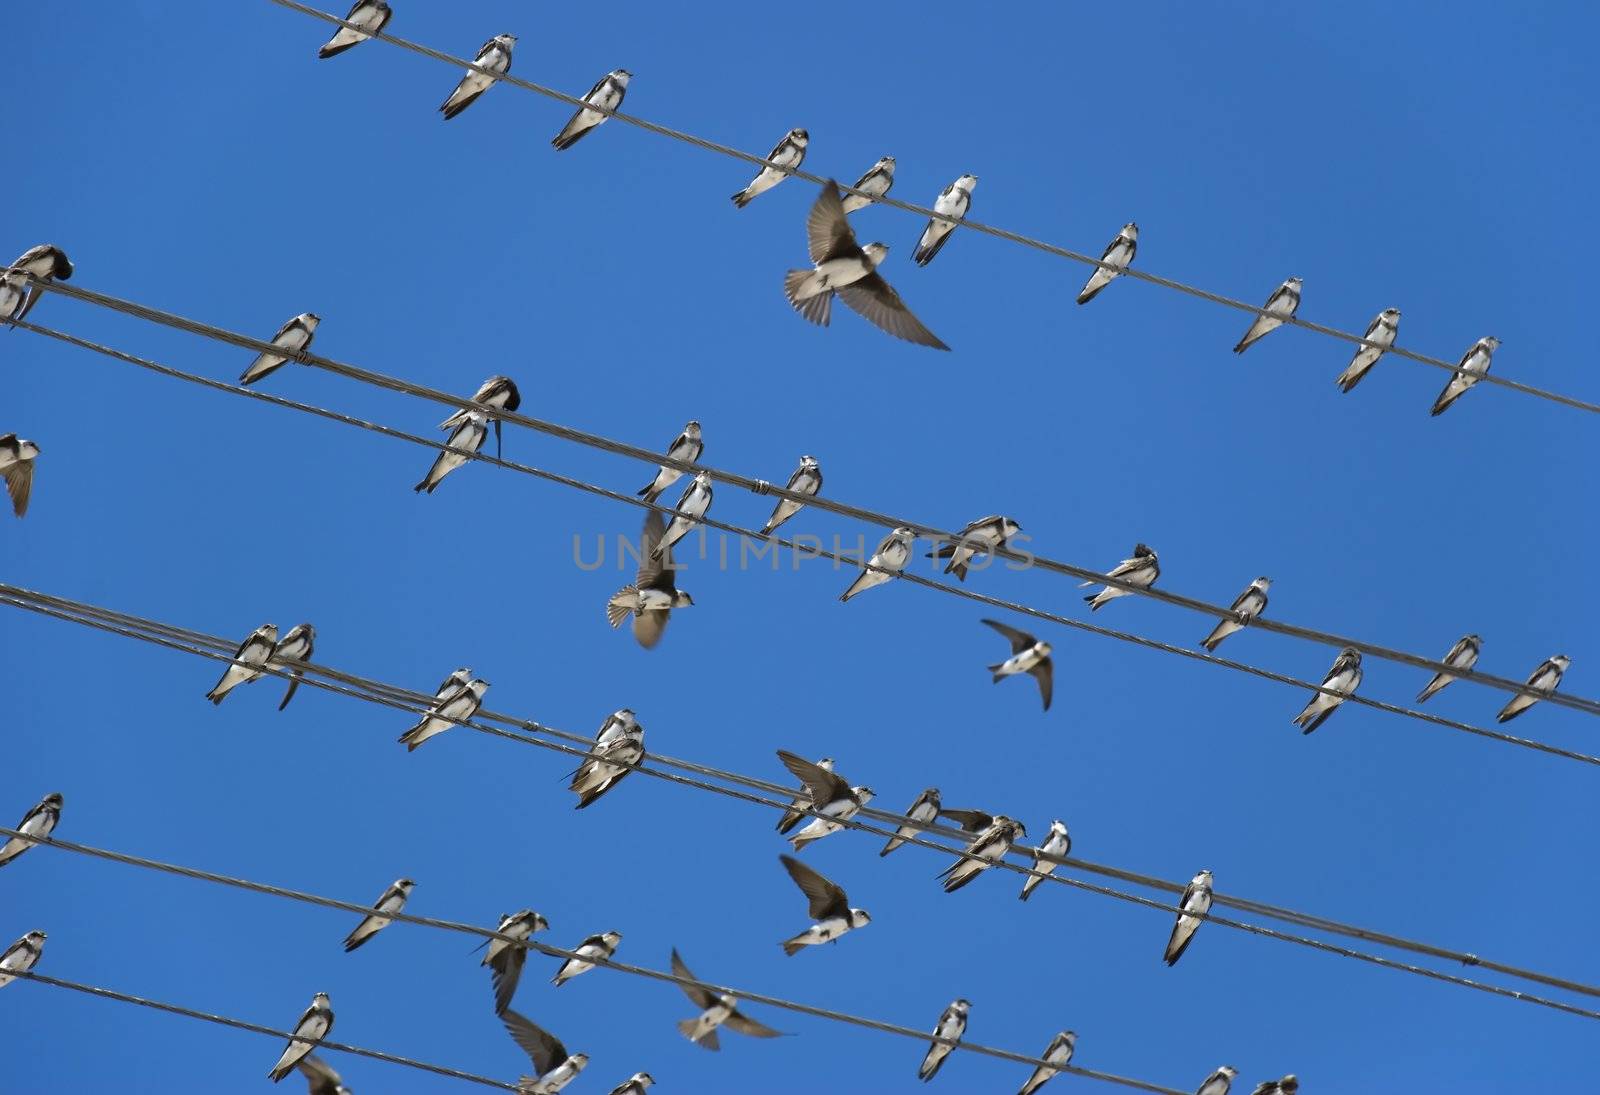 Birds (martlet) sitting on electric wires